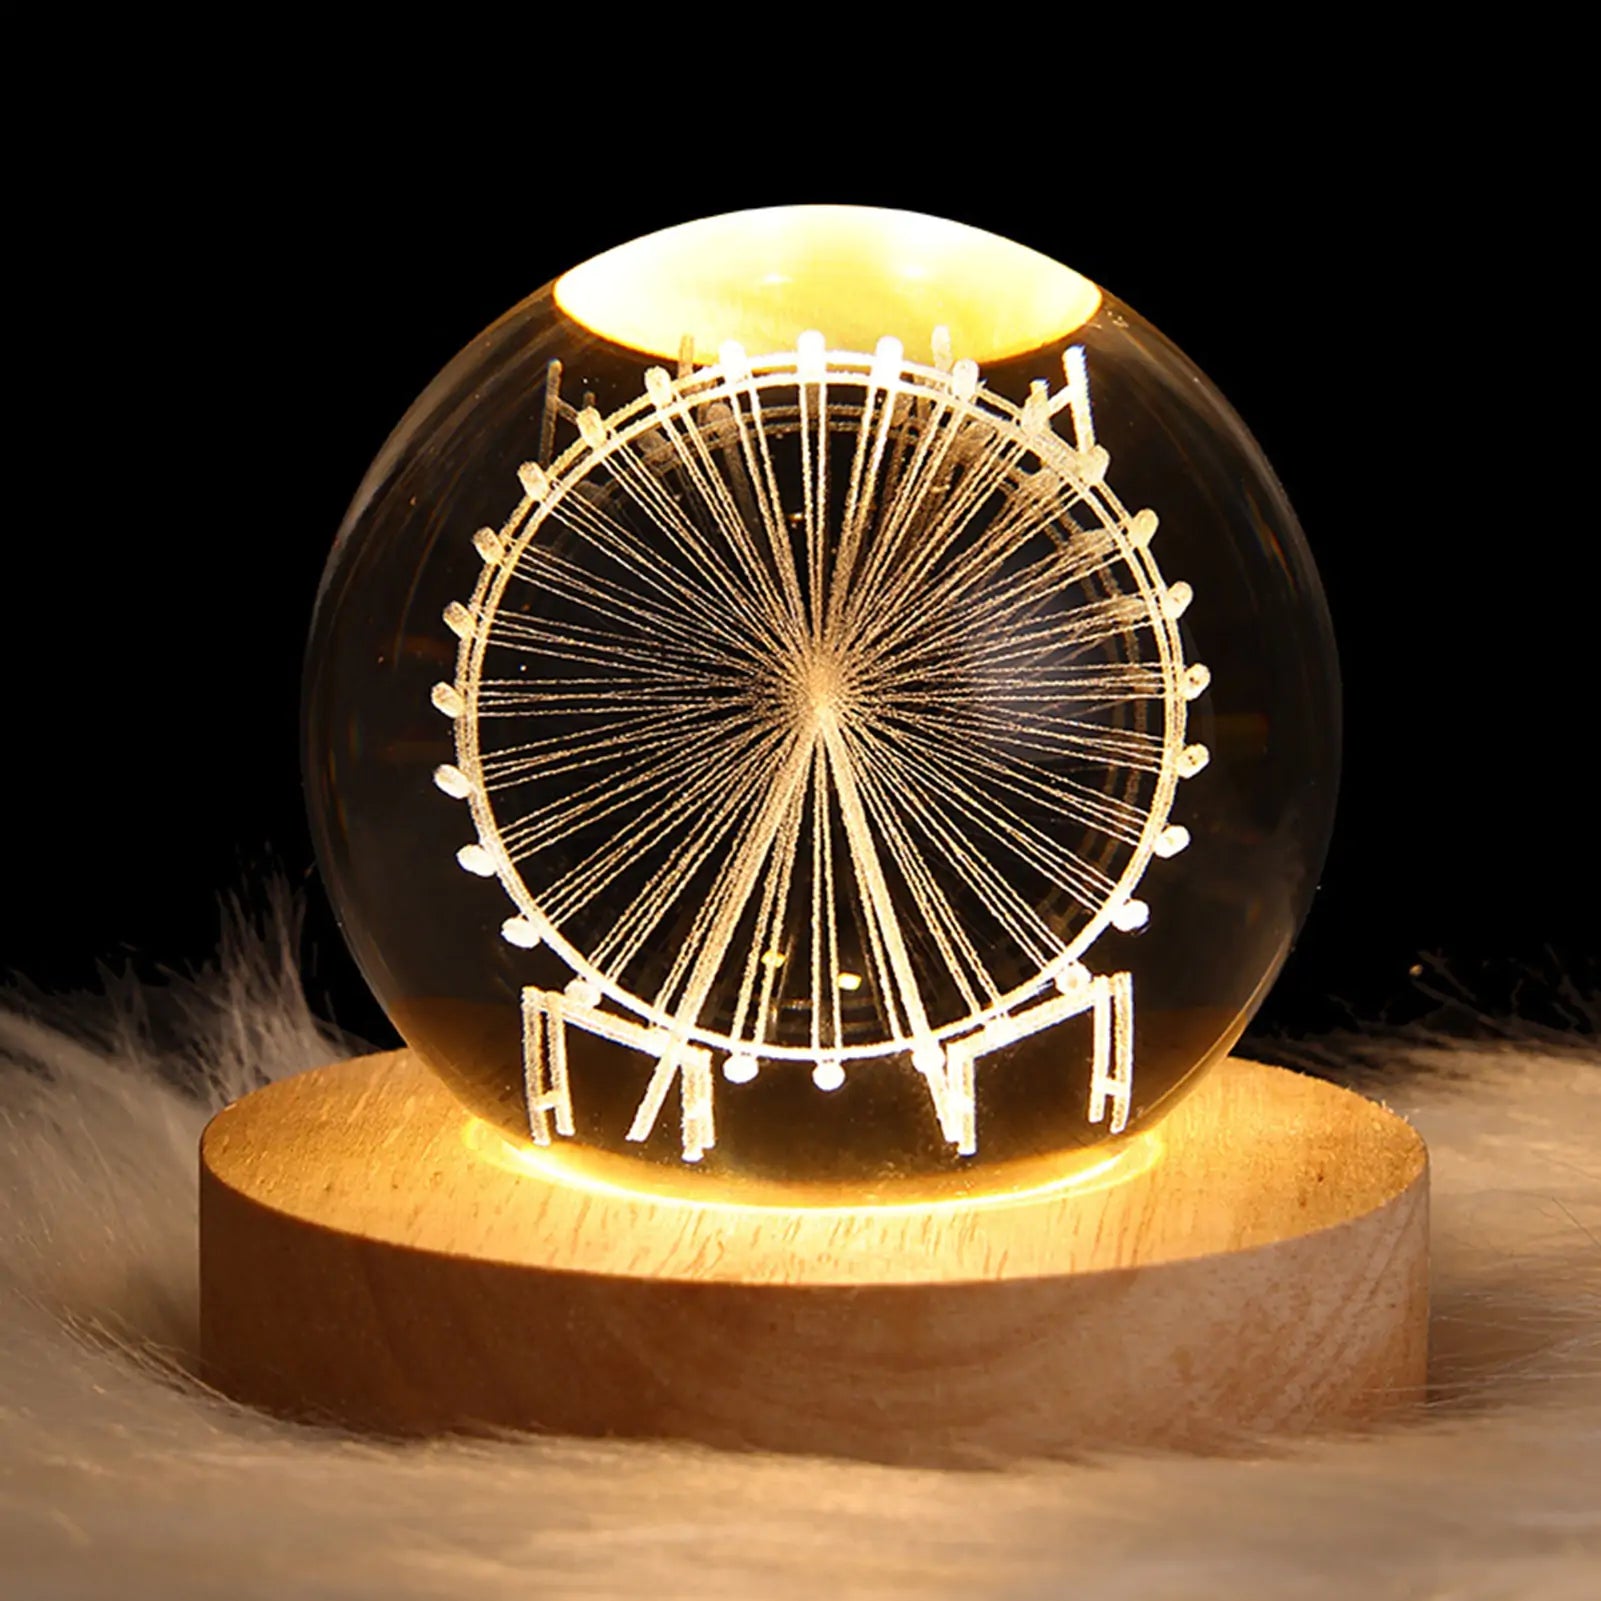 a glass ball with a ferris wheel inside of it